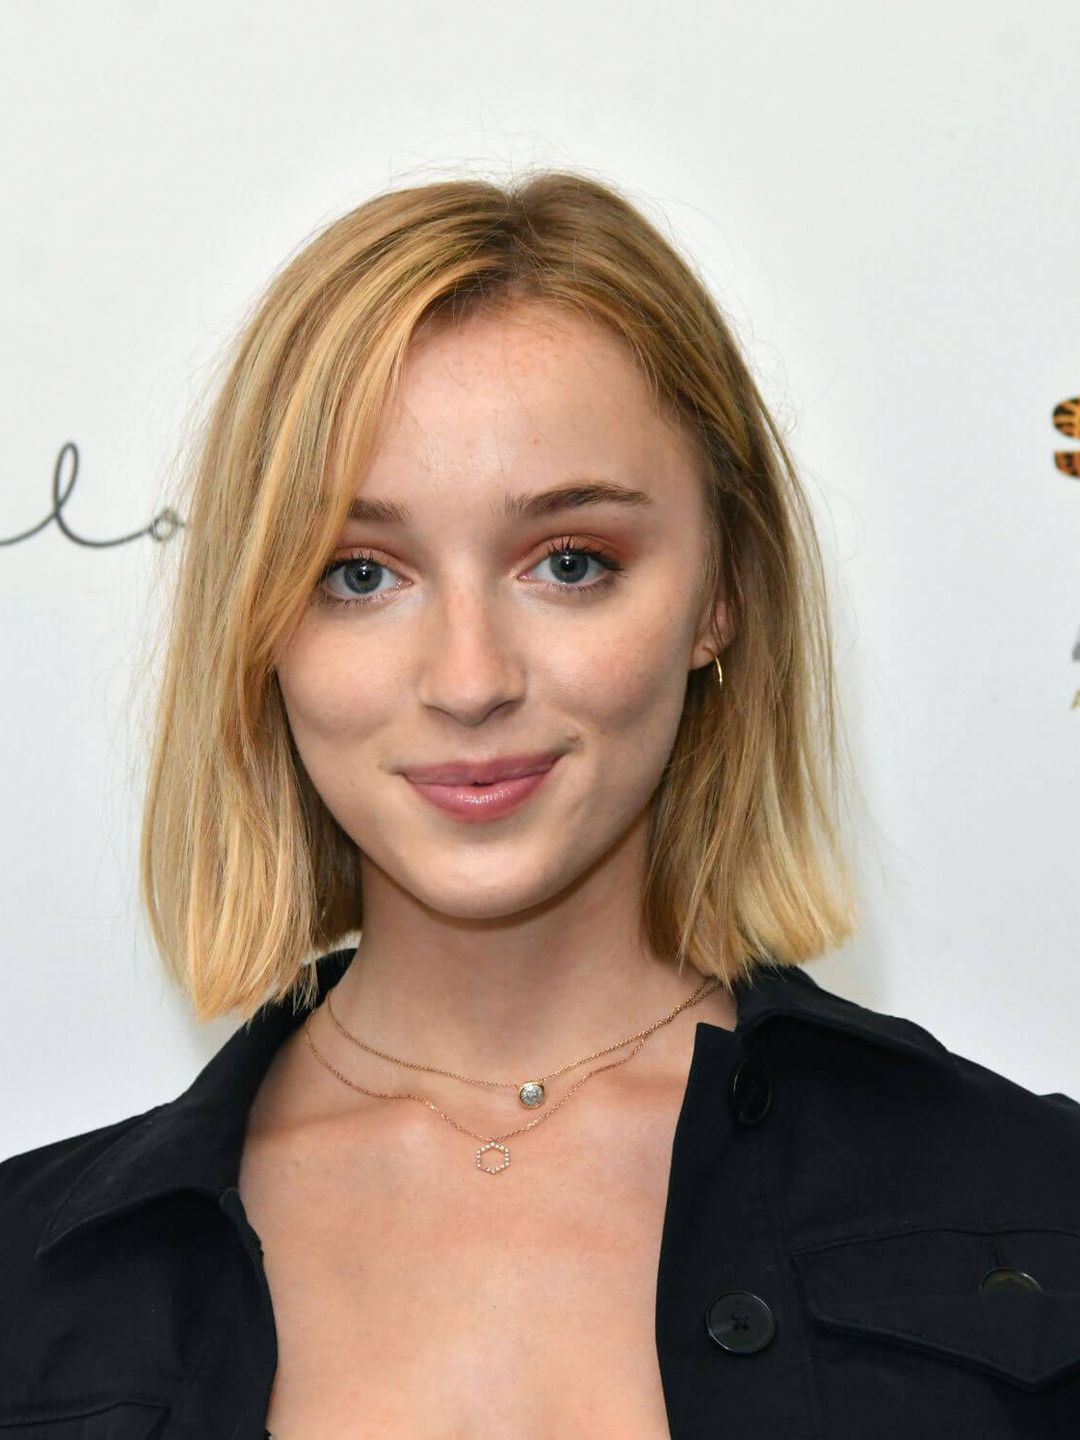 Phoebe Dynevor who is she